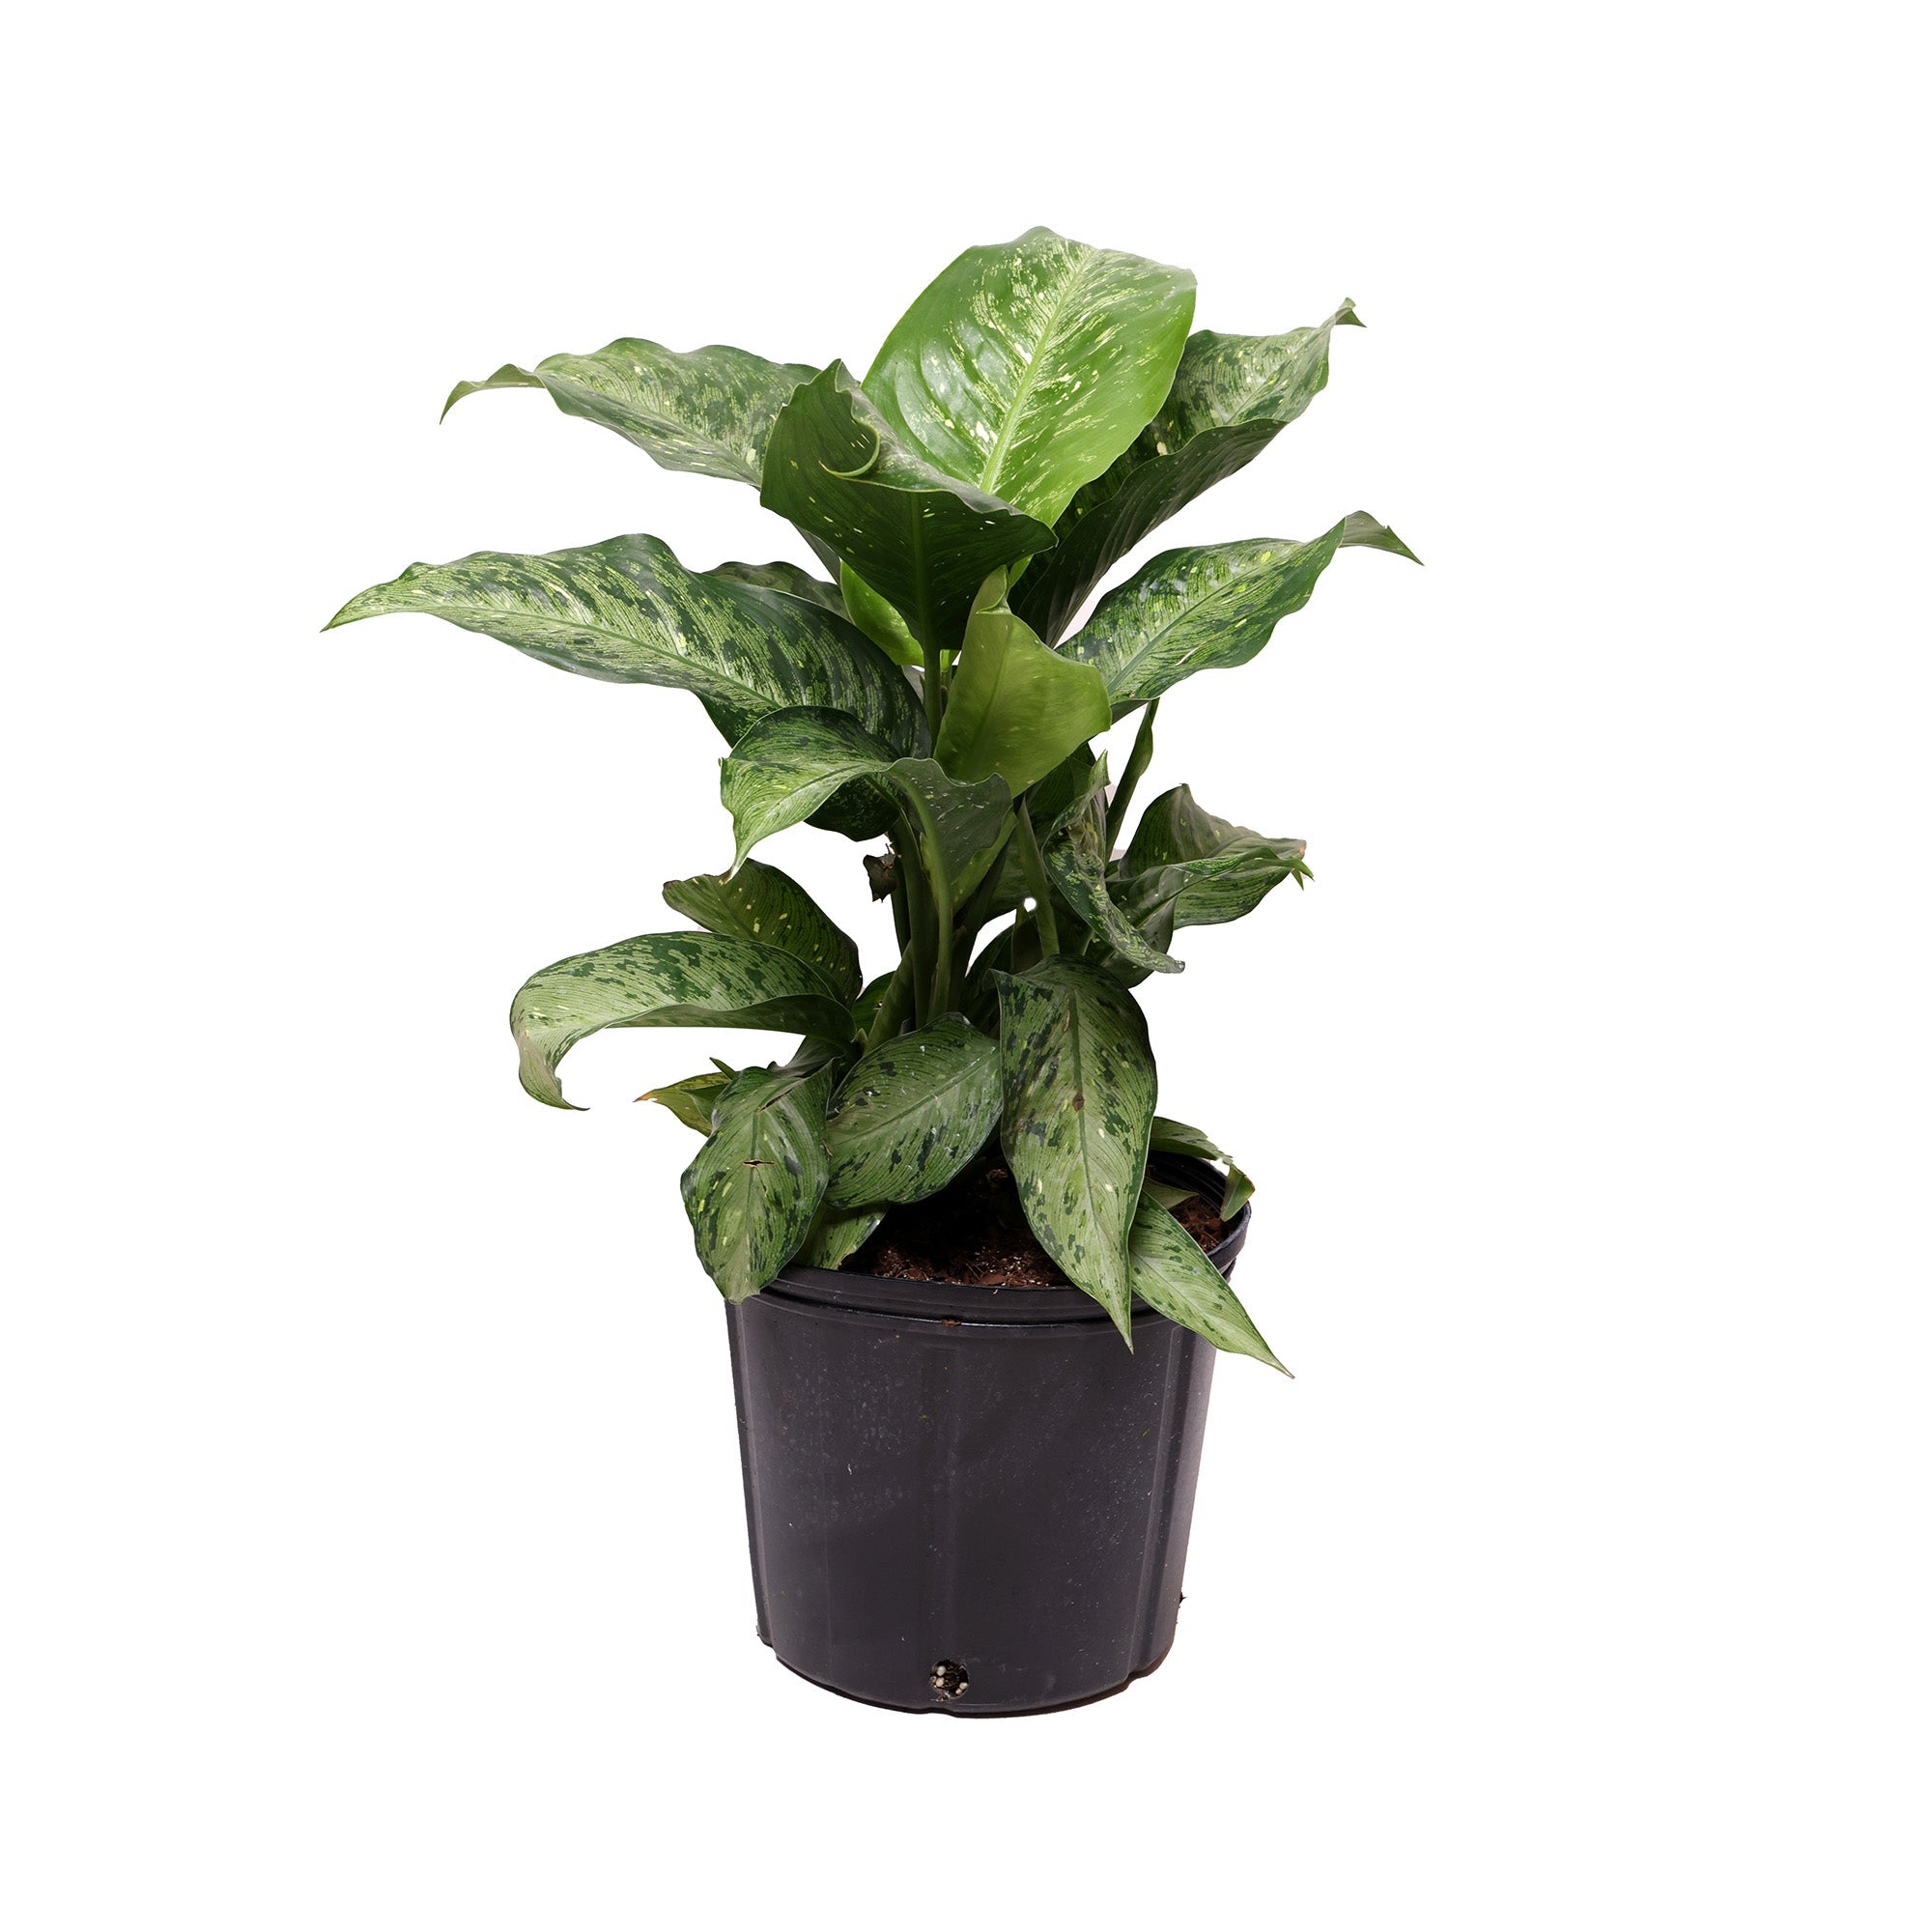 A Dieffenbachia Tropic Snow 10 Inches plant with broad, variegated green leaves in a black grower pot against a white background by Chive Studio.